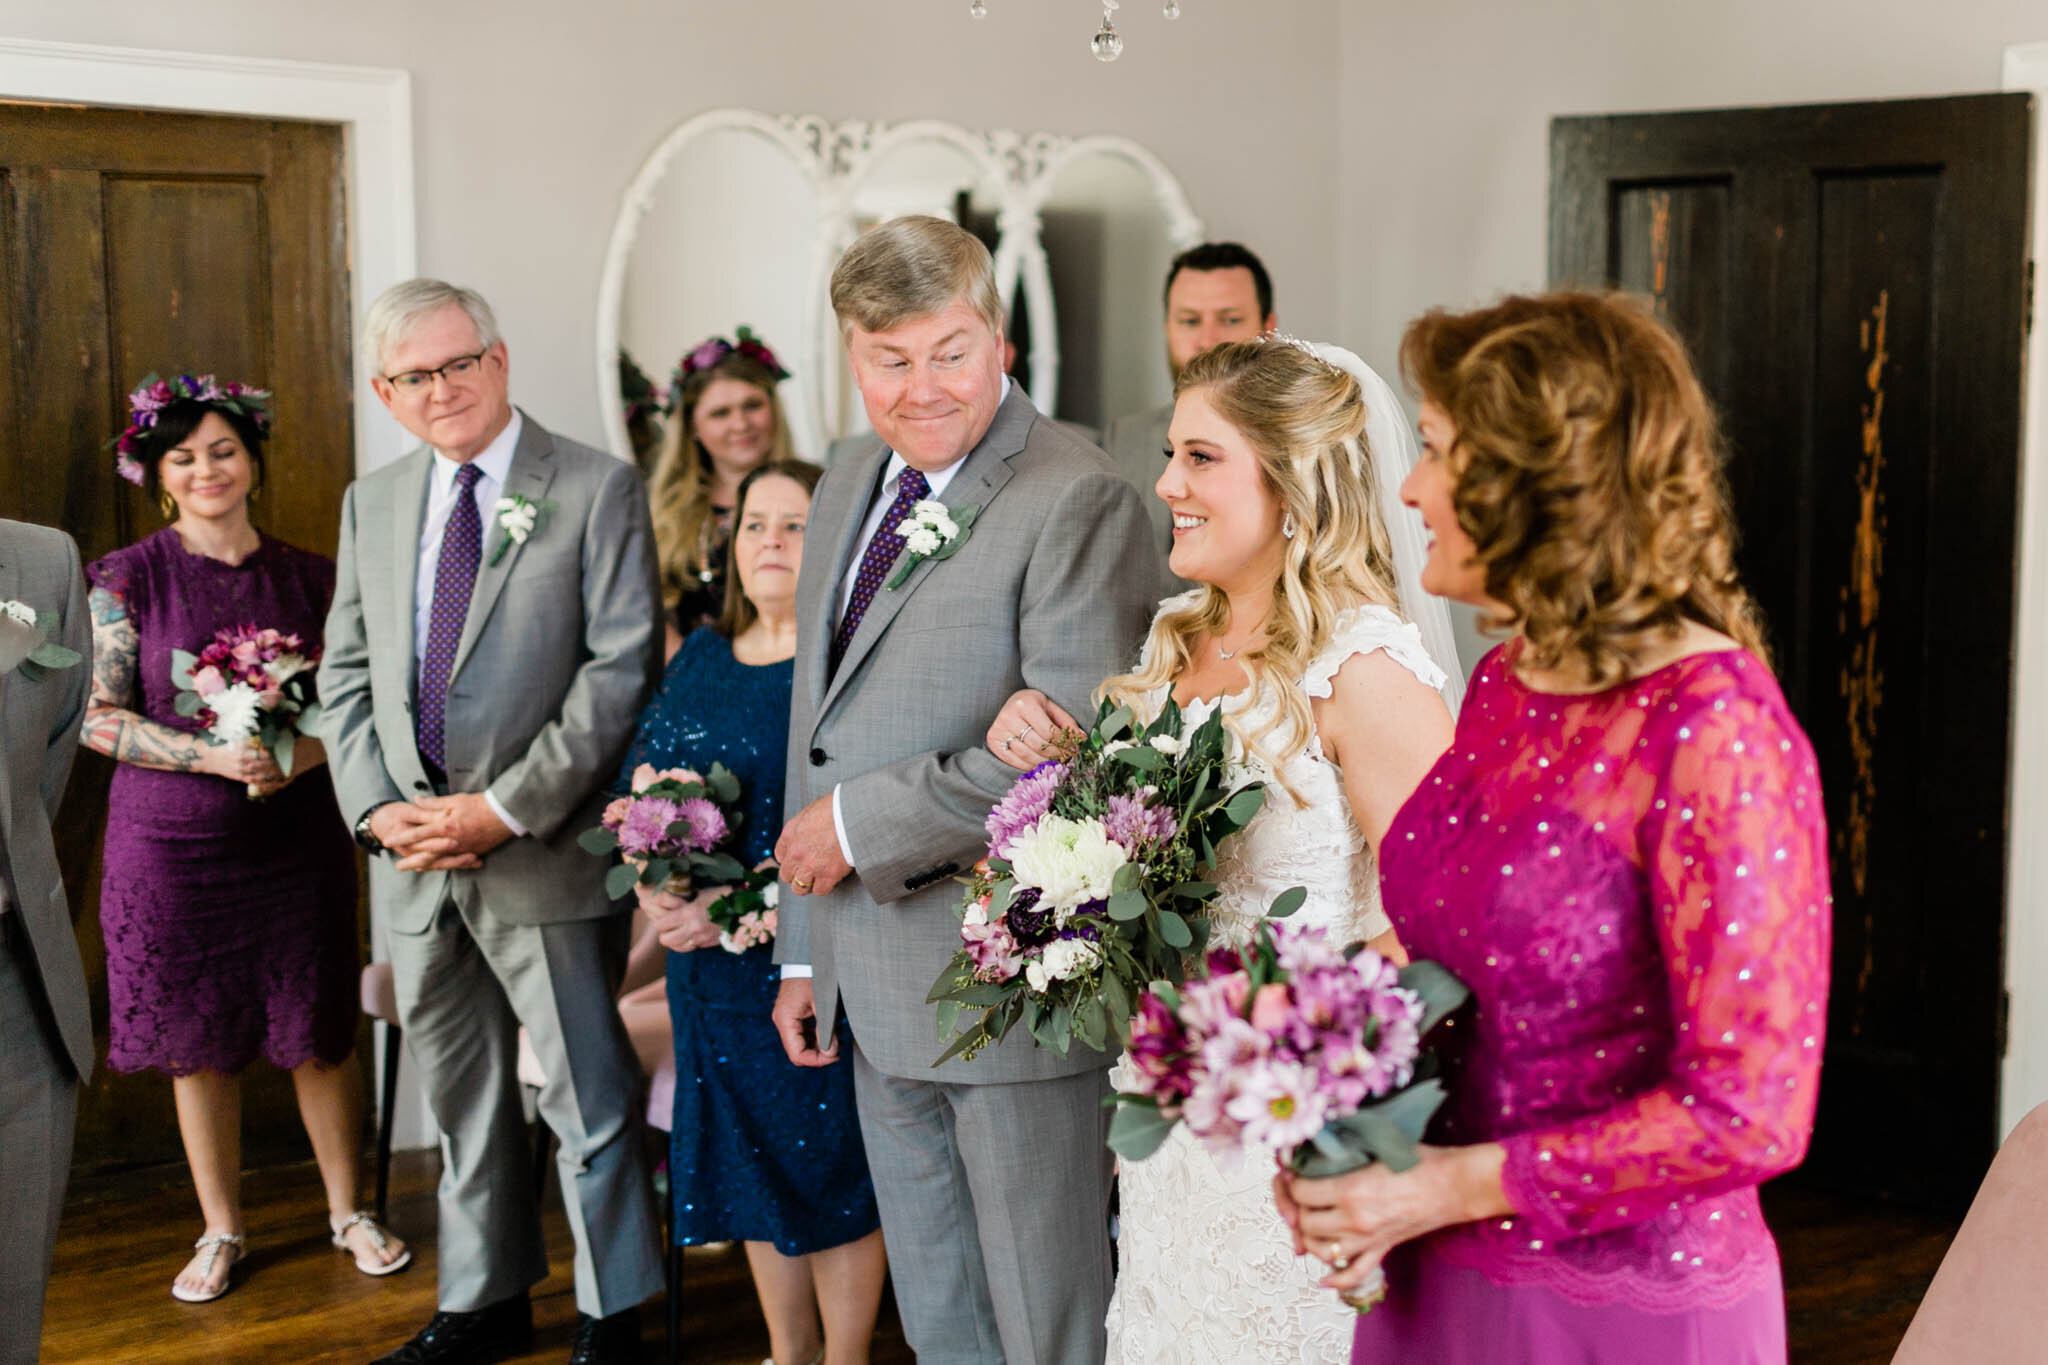 Durham Wedding Photographer | By G. Lin Photography | Bride standing with father and mother during the ceremony